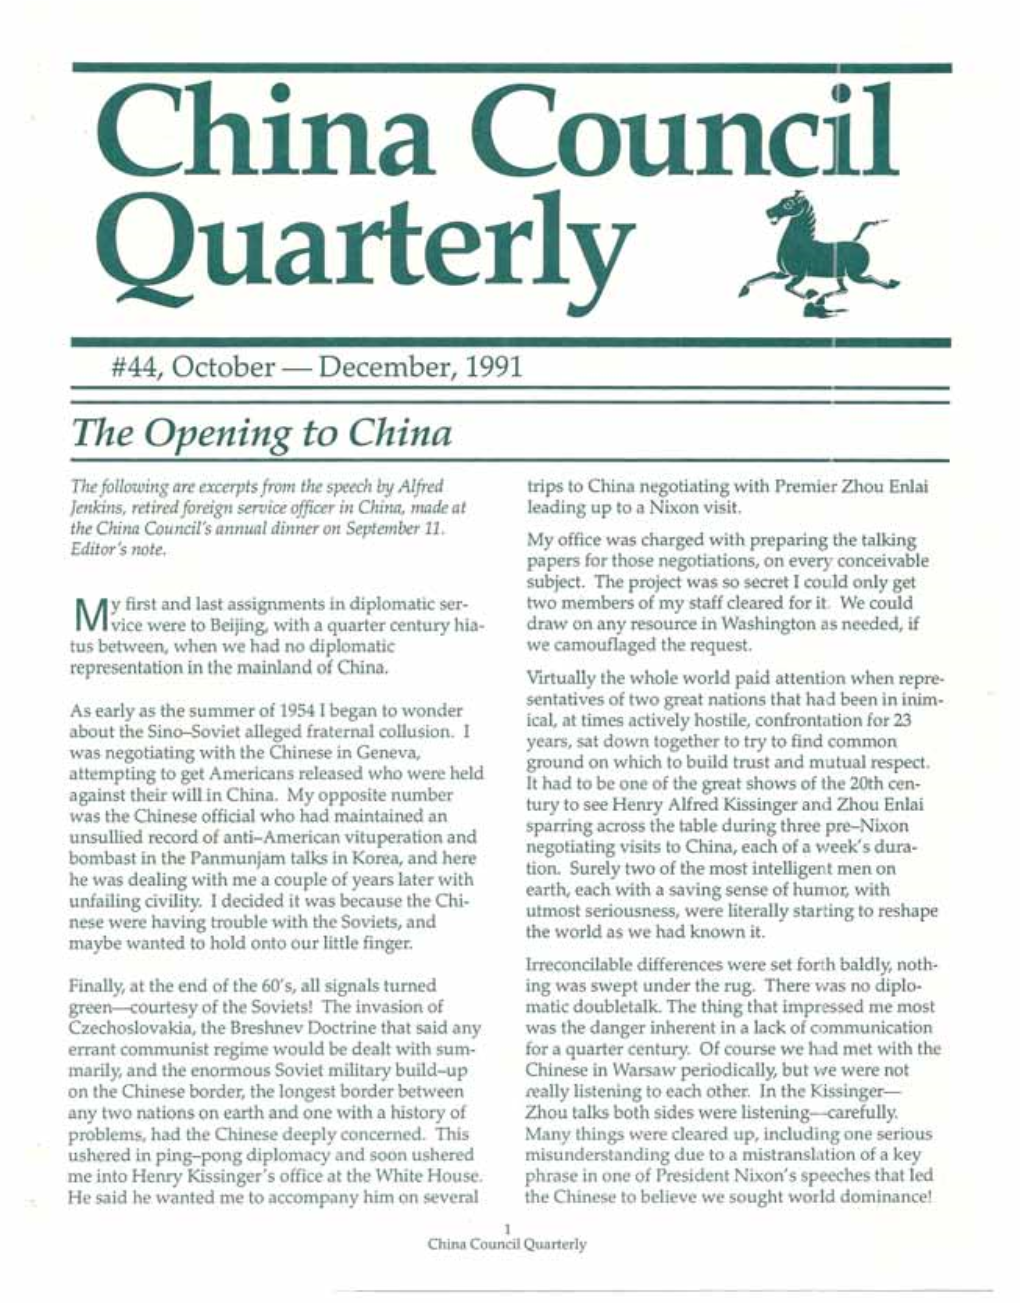 44, October - December, 1991 the Opening to China